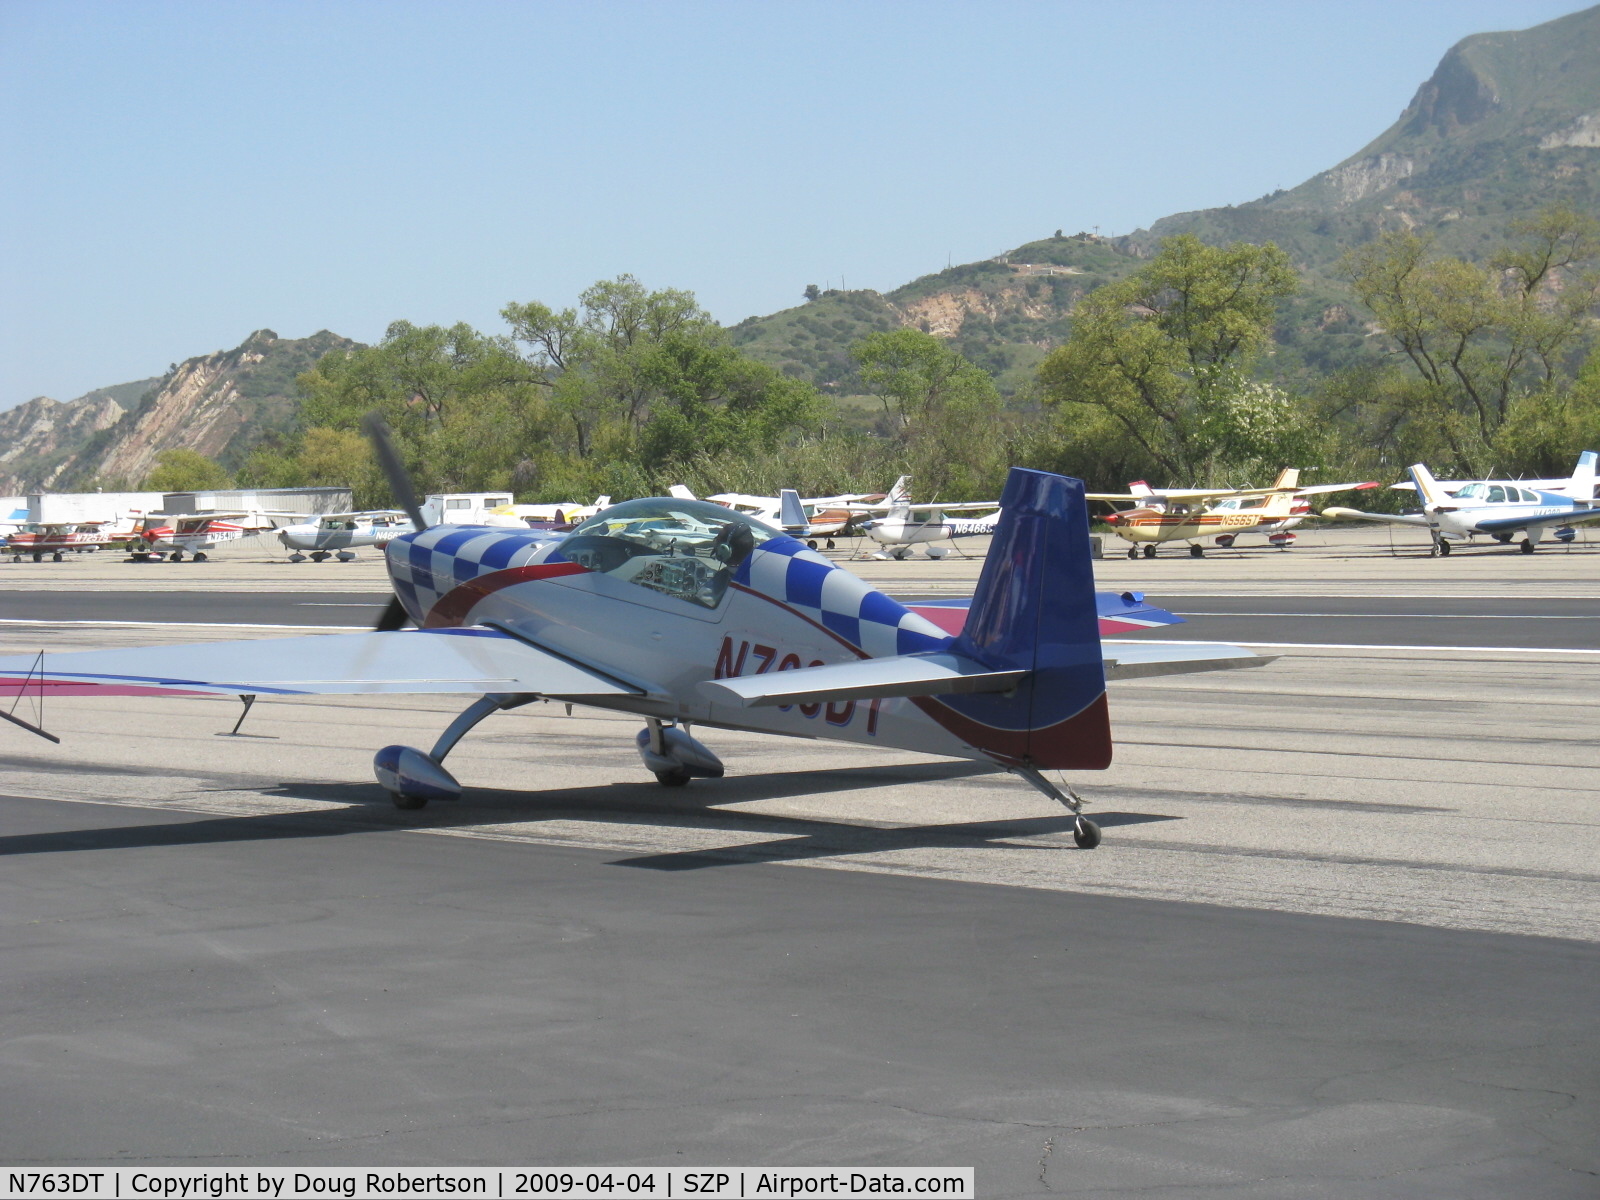 N763DT, 2007 Extra EA-300/L C/N 1258, 2007 Extra Flugzeugproduktions EXTRA EA 300L, Lycoming AEIO-540-L1B5 300 Hp, taxi to Rwy 22